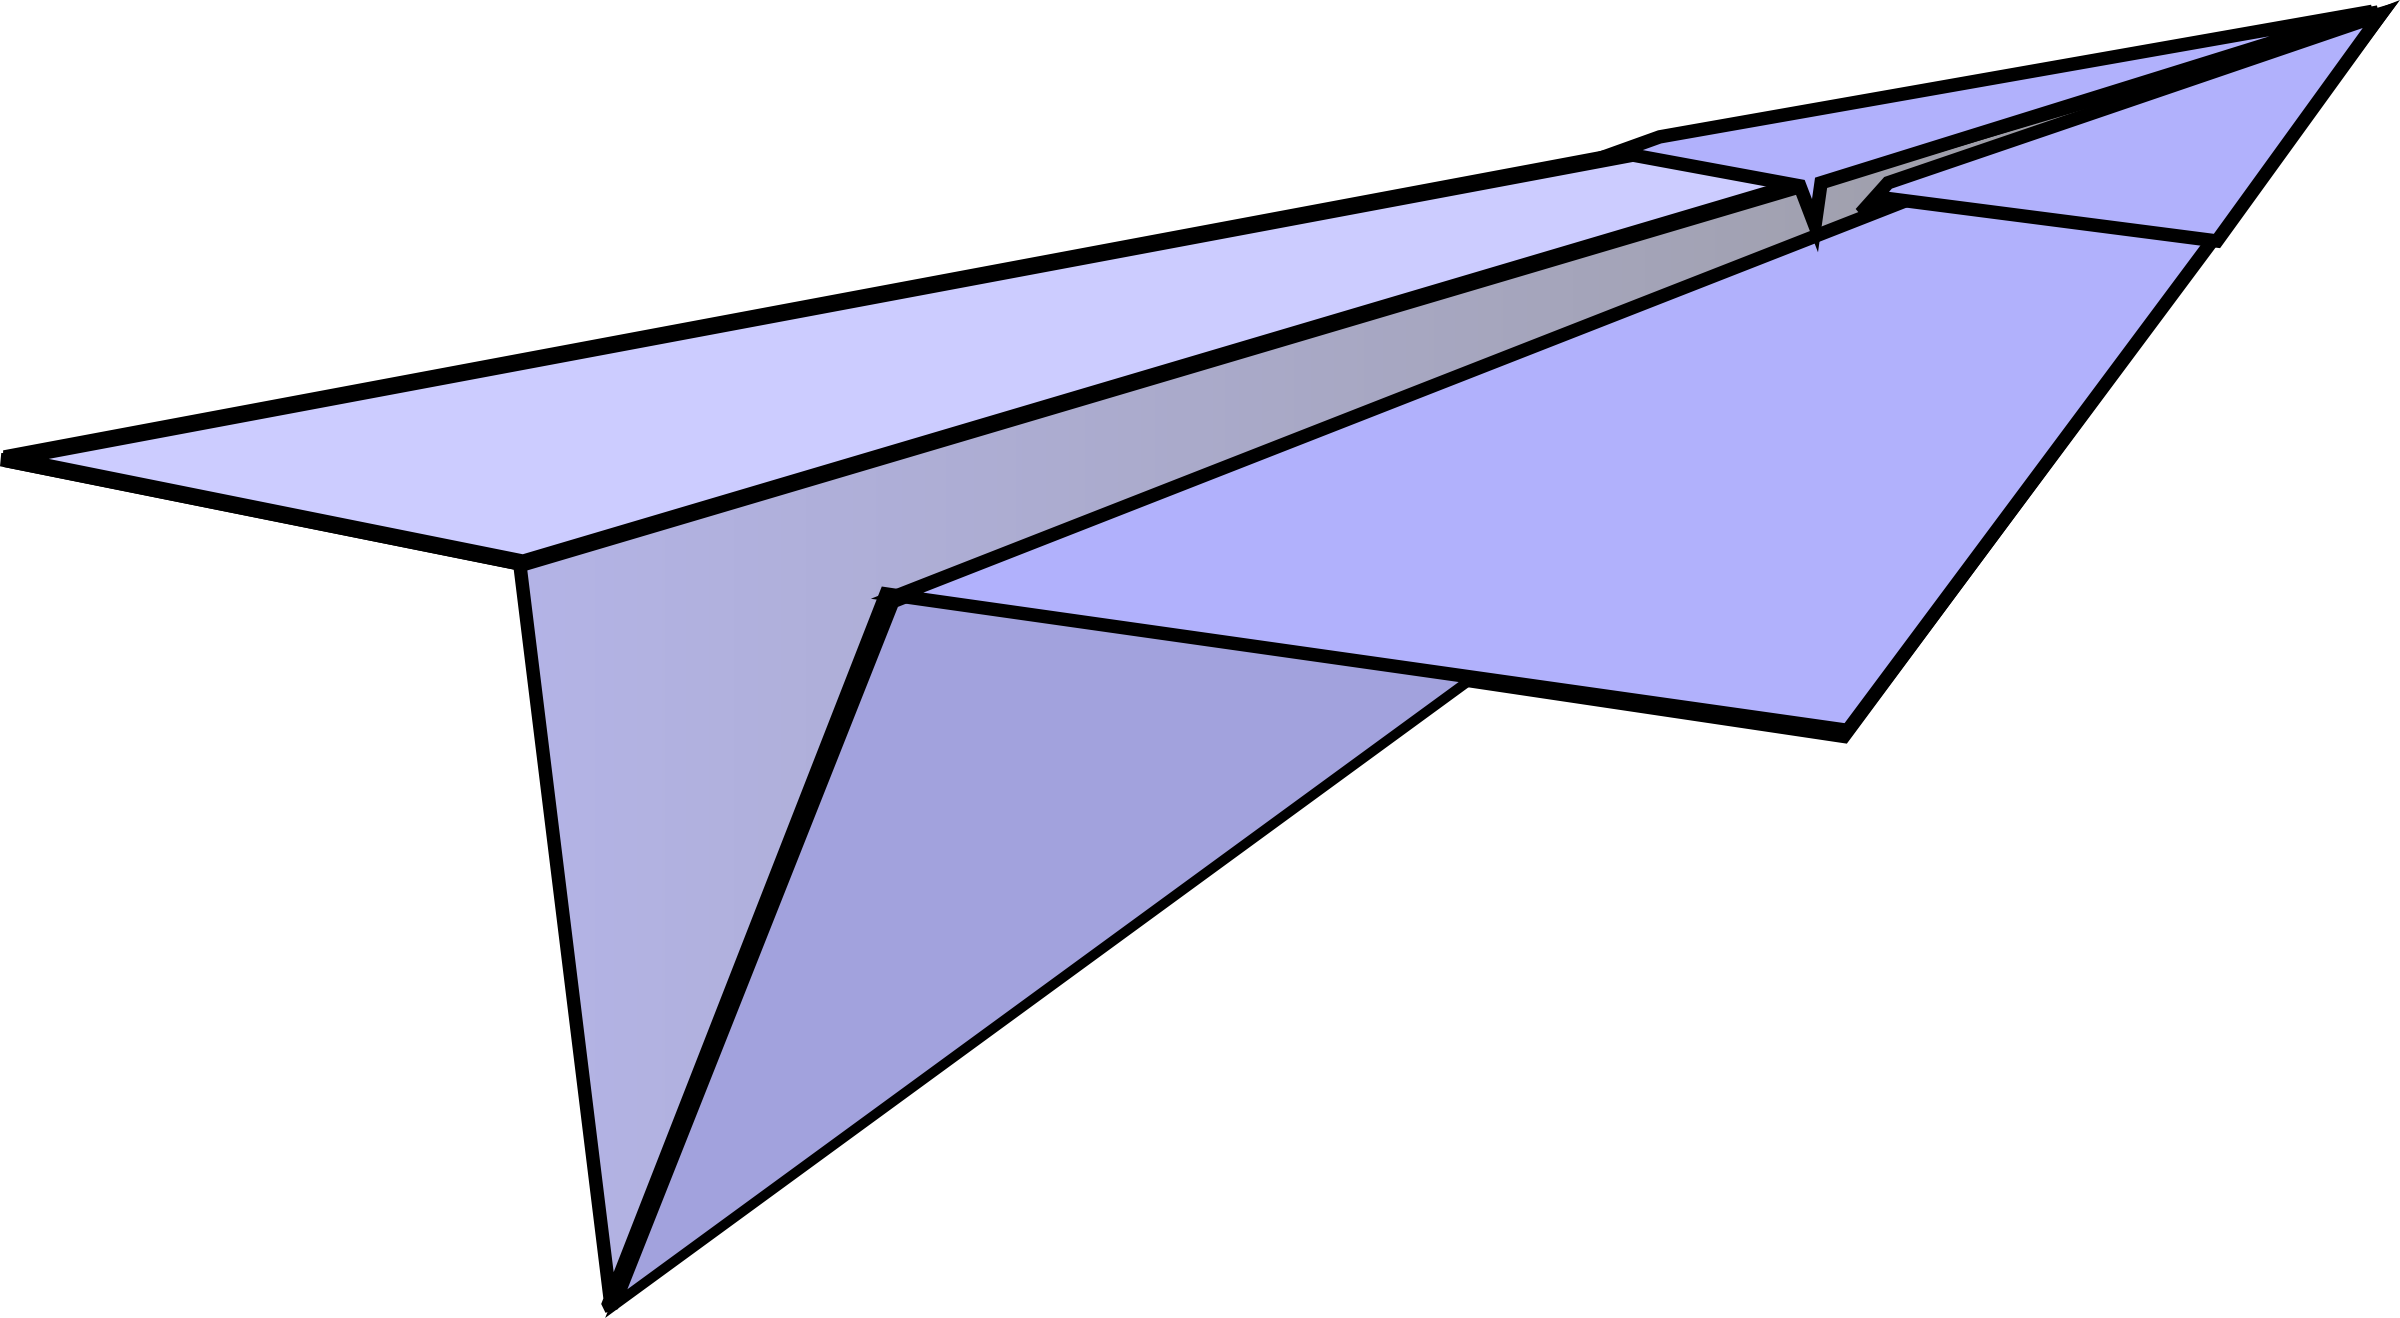 Paper Airplanes Clipart - Cliparts and Others Art Inspiration